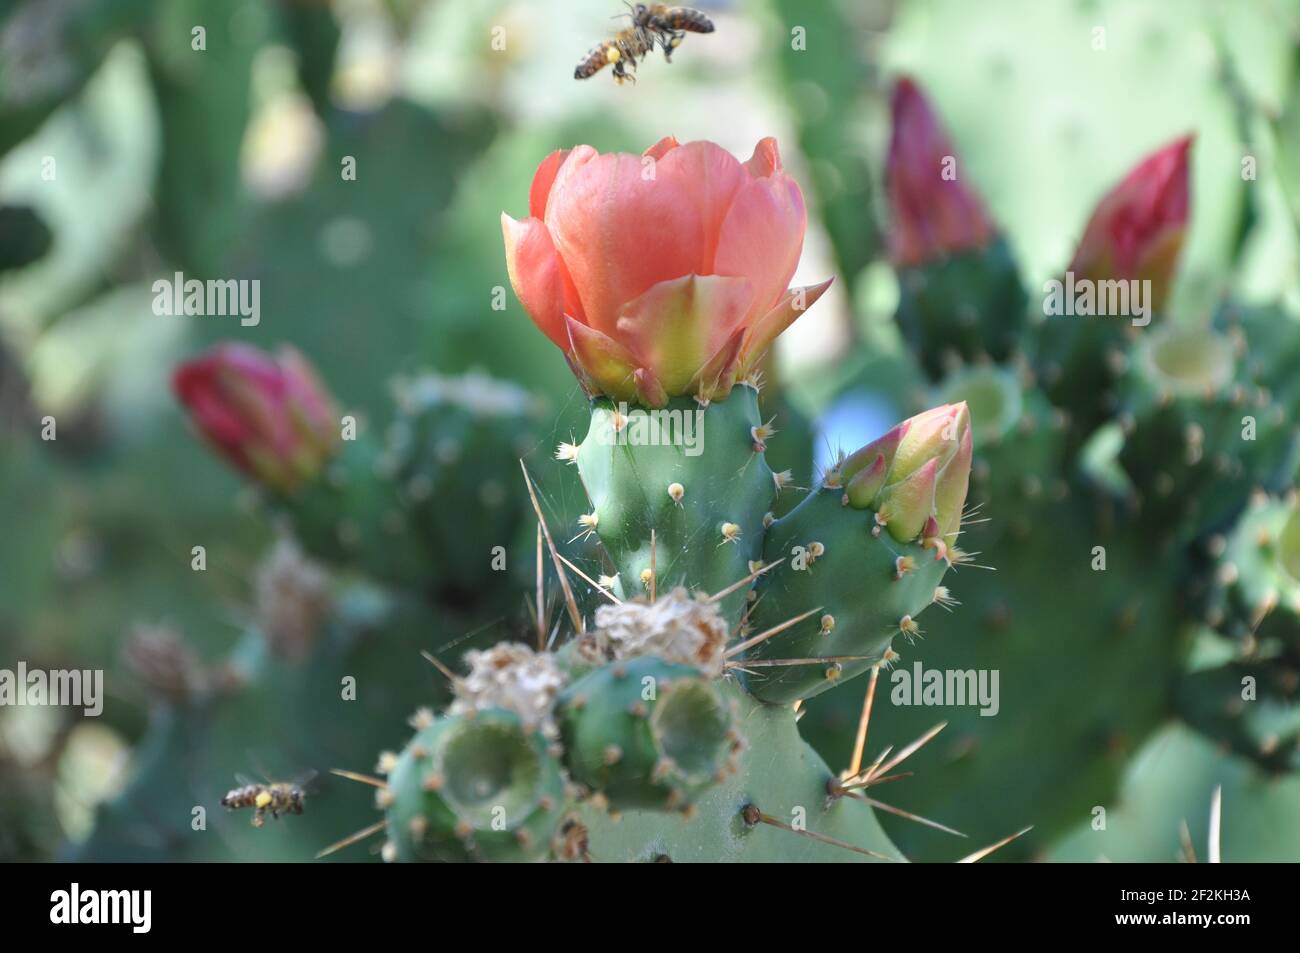 Indian fig opuntia, barbary fig, cactus pear in blossom. Prickly pears cactus.Opuntia ficus-indica with pink flowers. Stock Photo